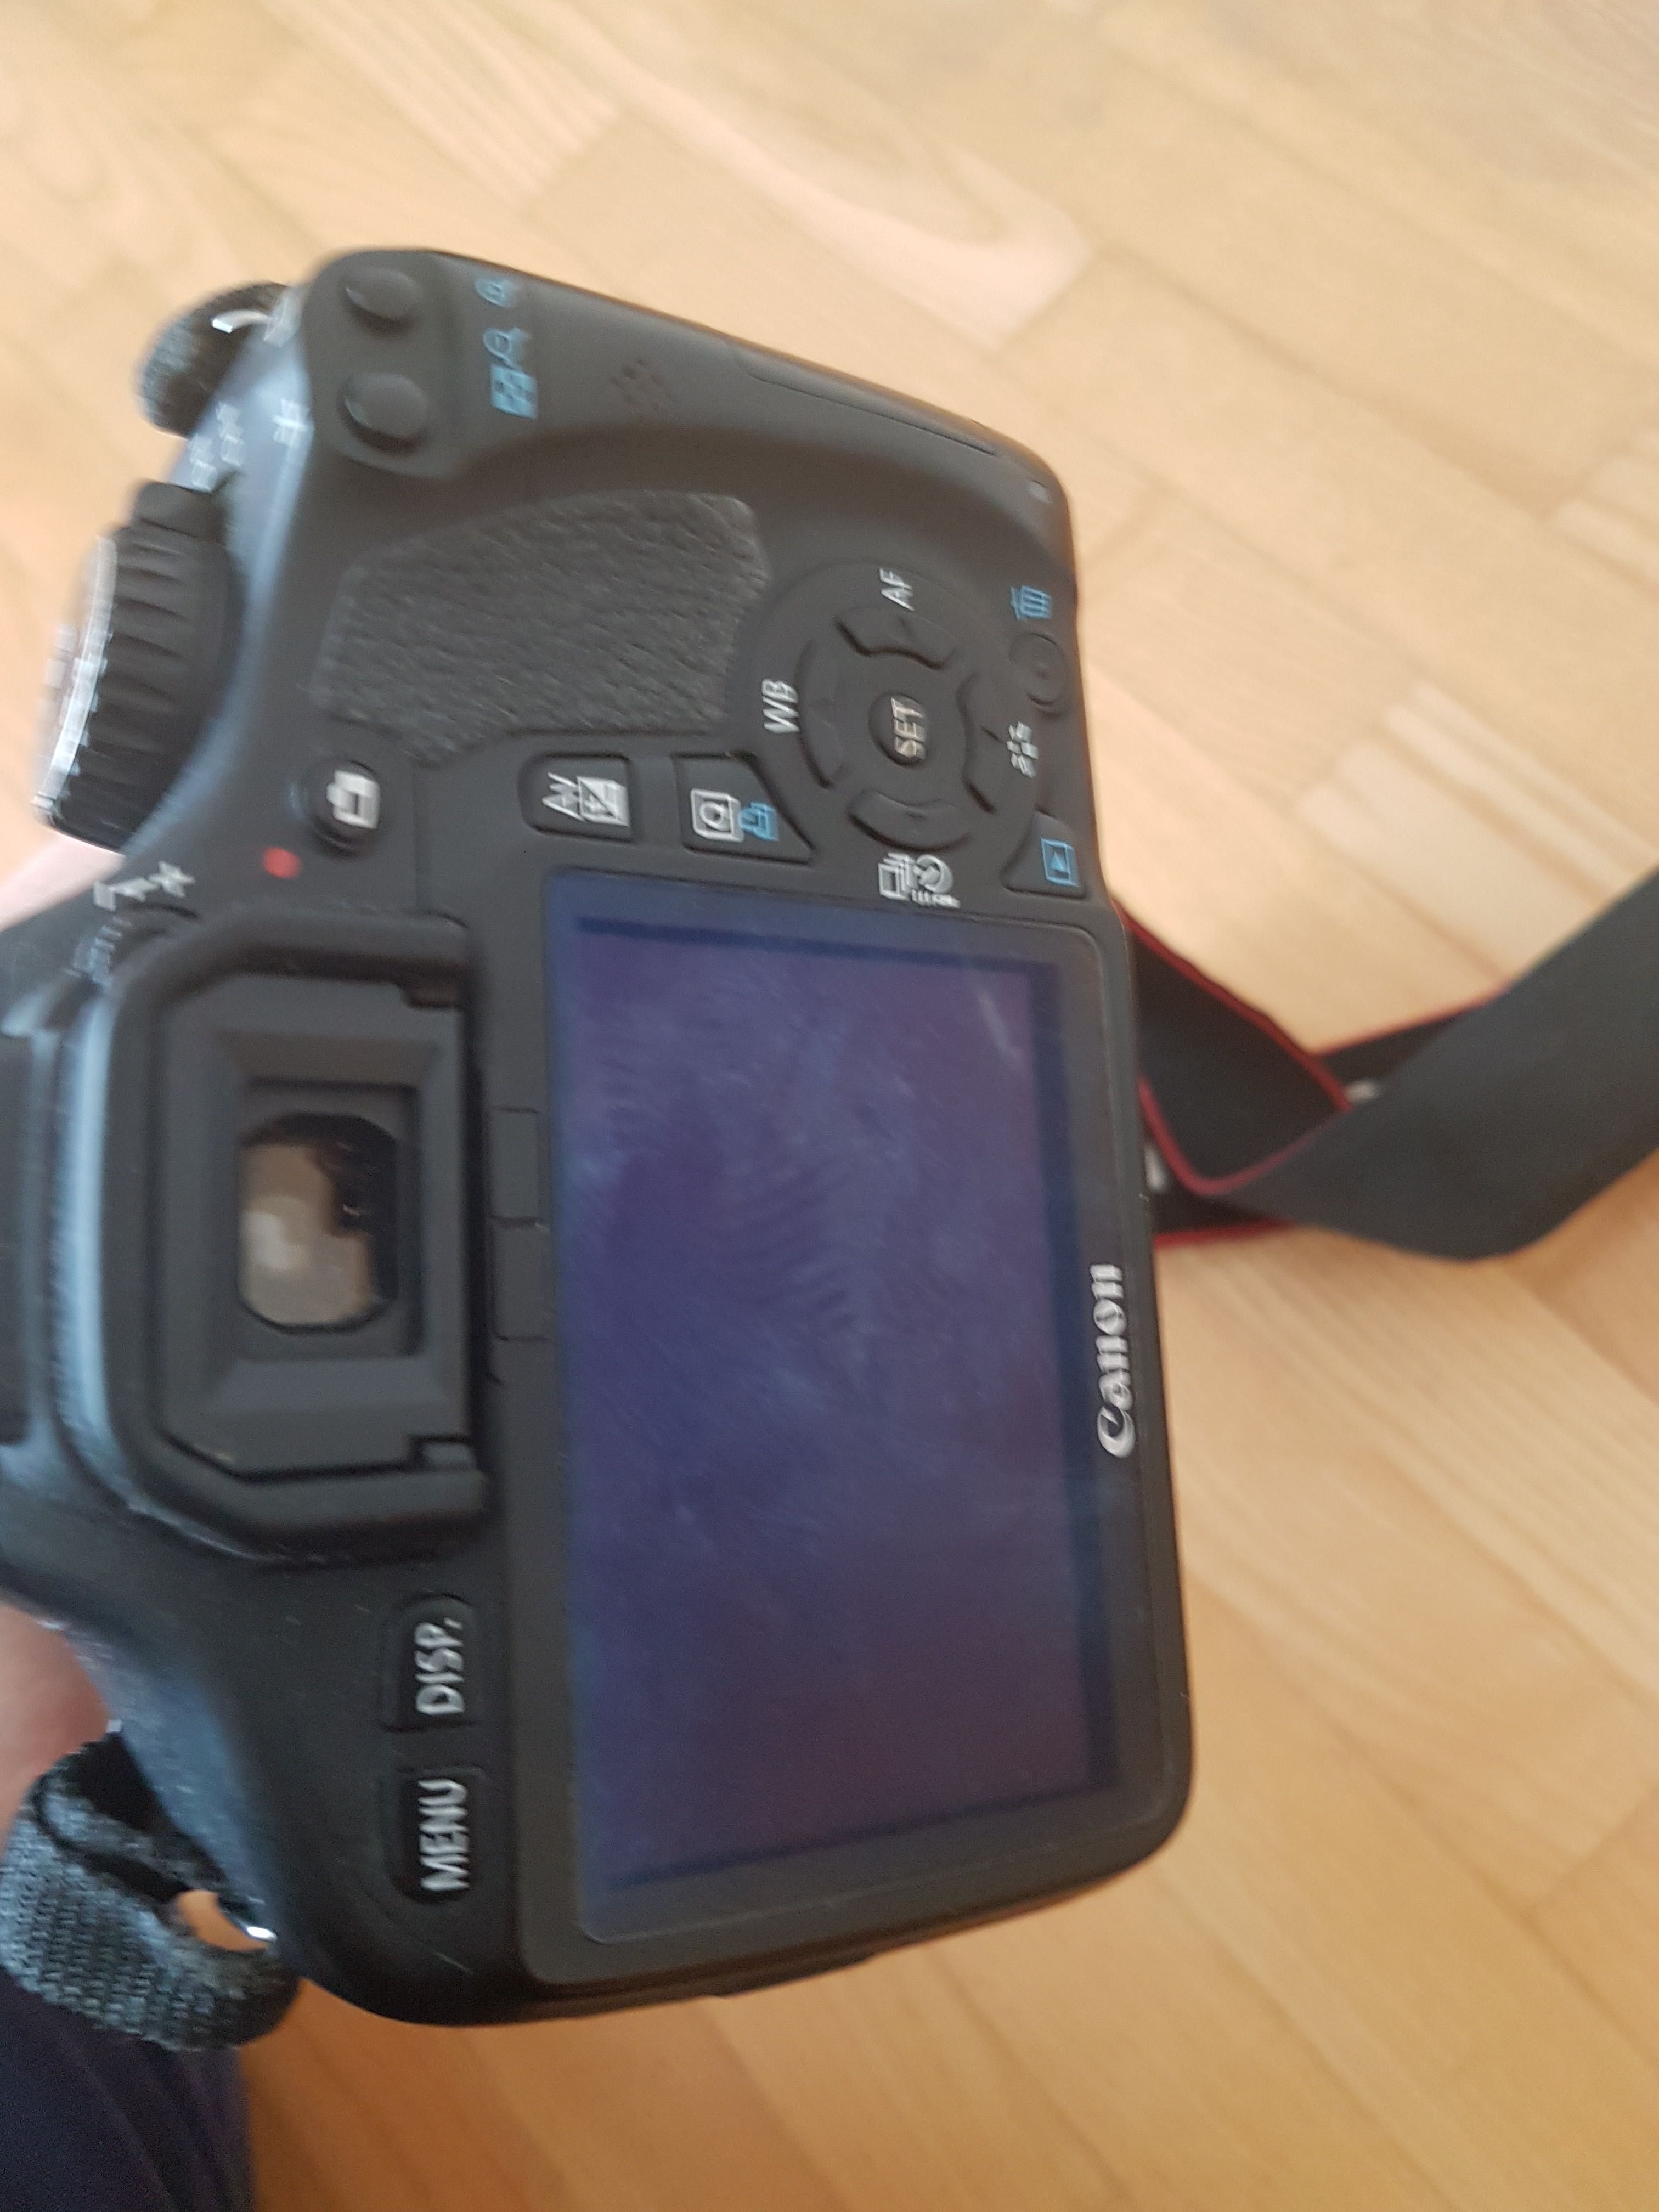 Canon Eos 550d EF S 18 135is Kit